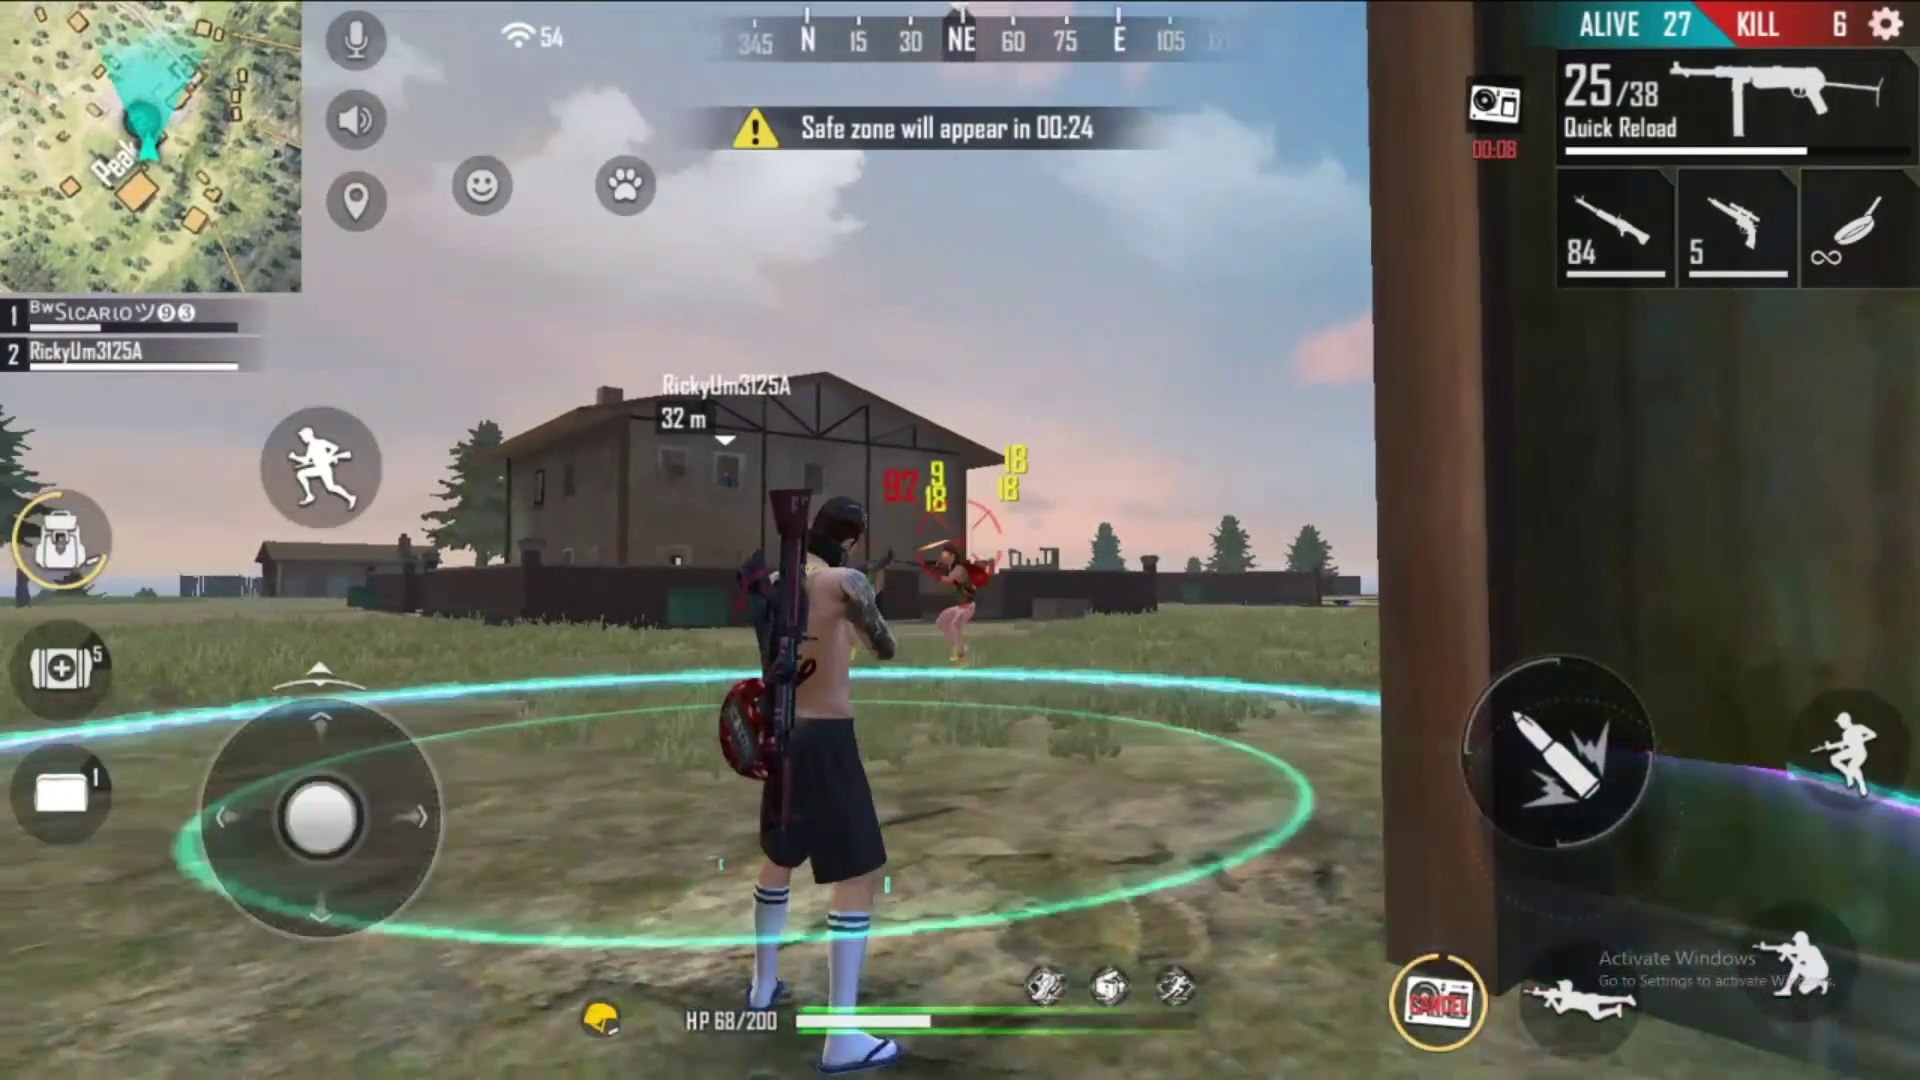 Hacker in my game-SFFG gamers /Garena free fire - video Dailymotion